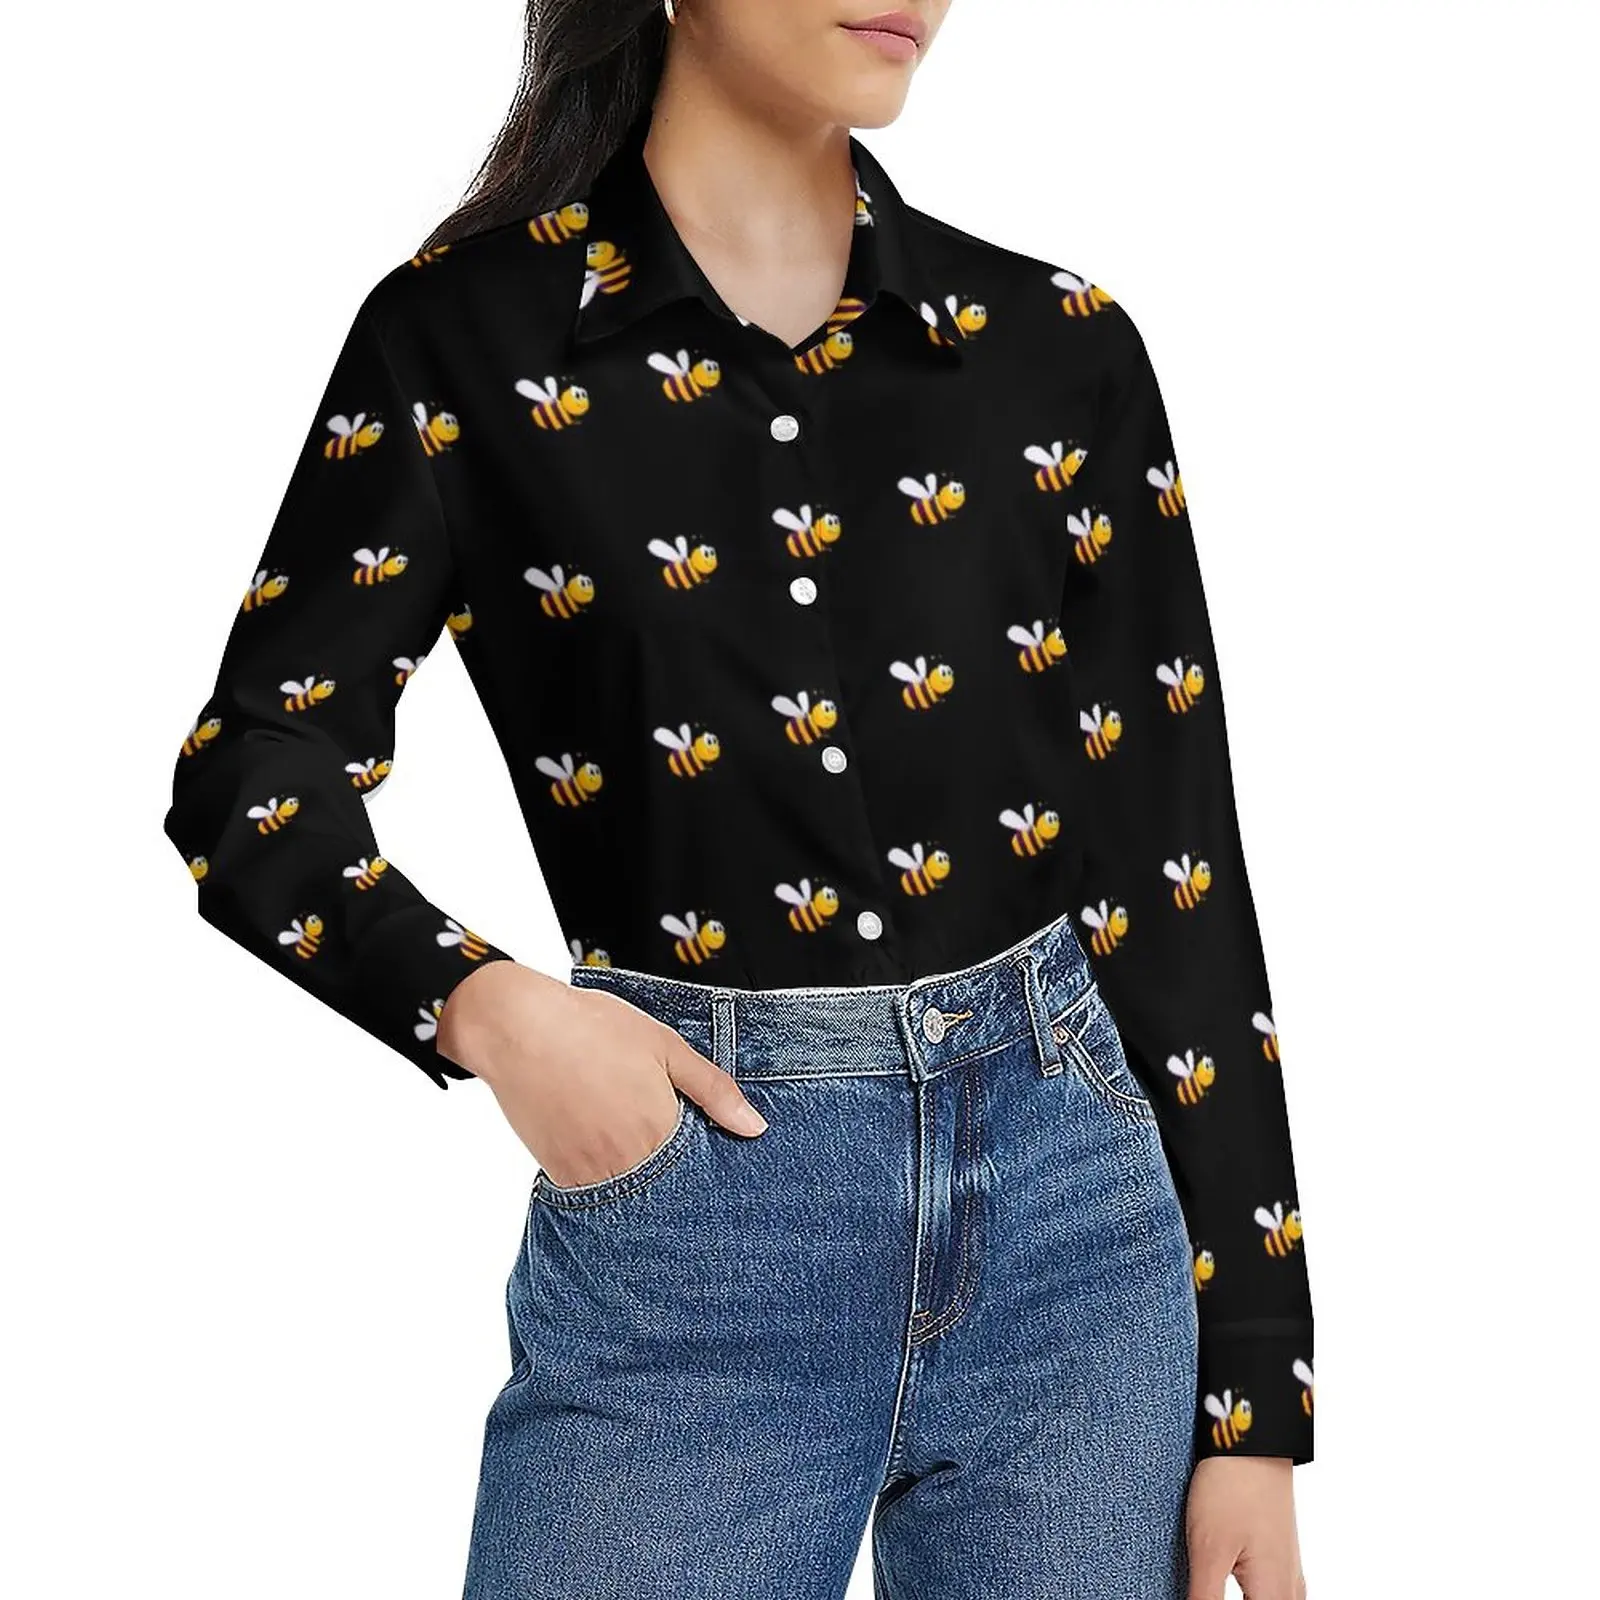 

Bumble Bees Blouse Black Funny Bee Print Aesthetic Custom Blouses Woman Street Fashion Shirt Summer Long Sleeve Oversize Top